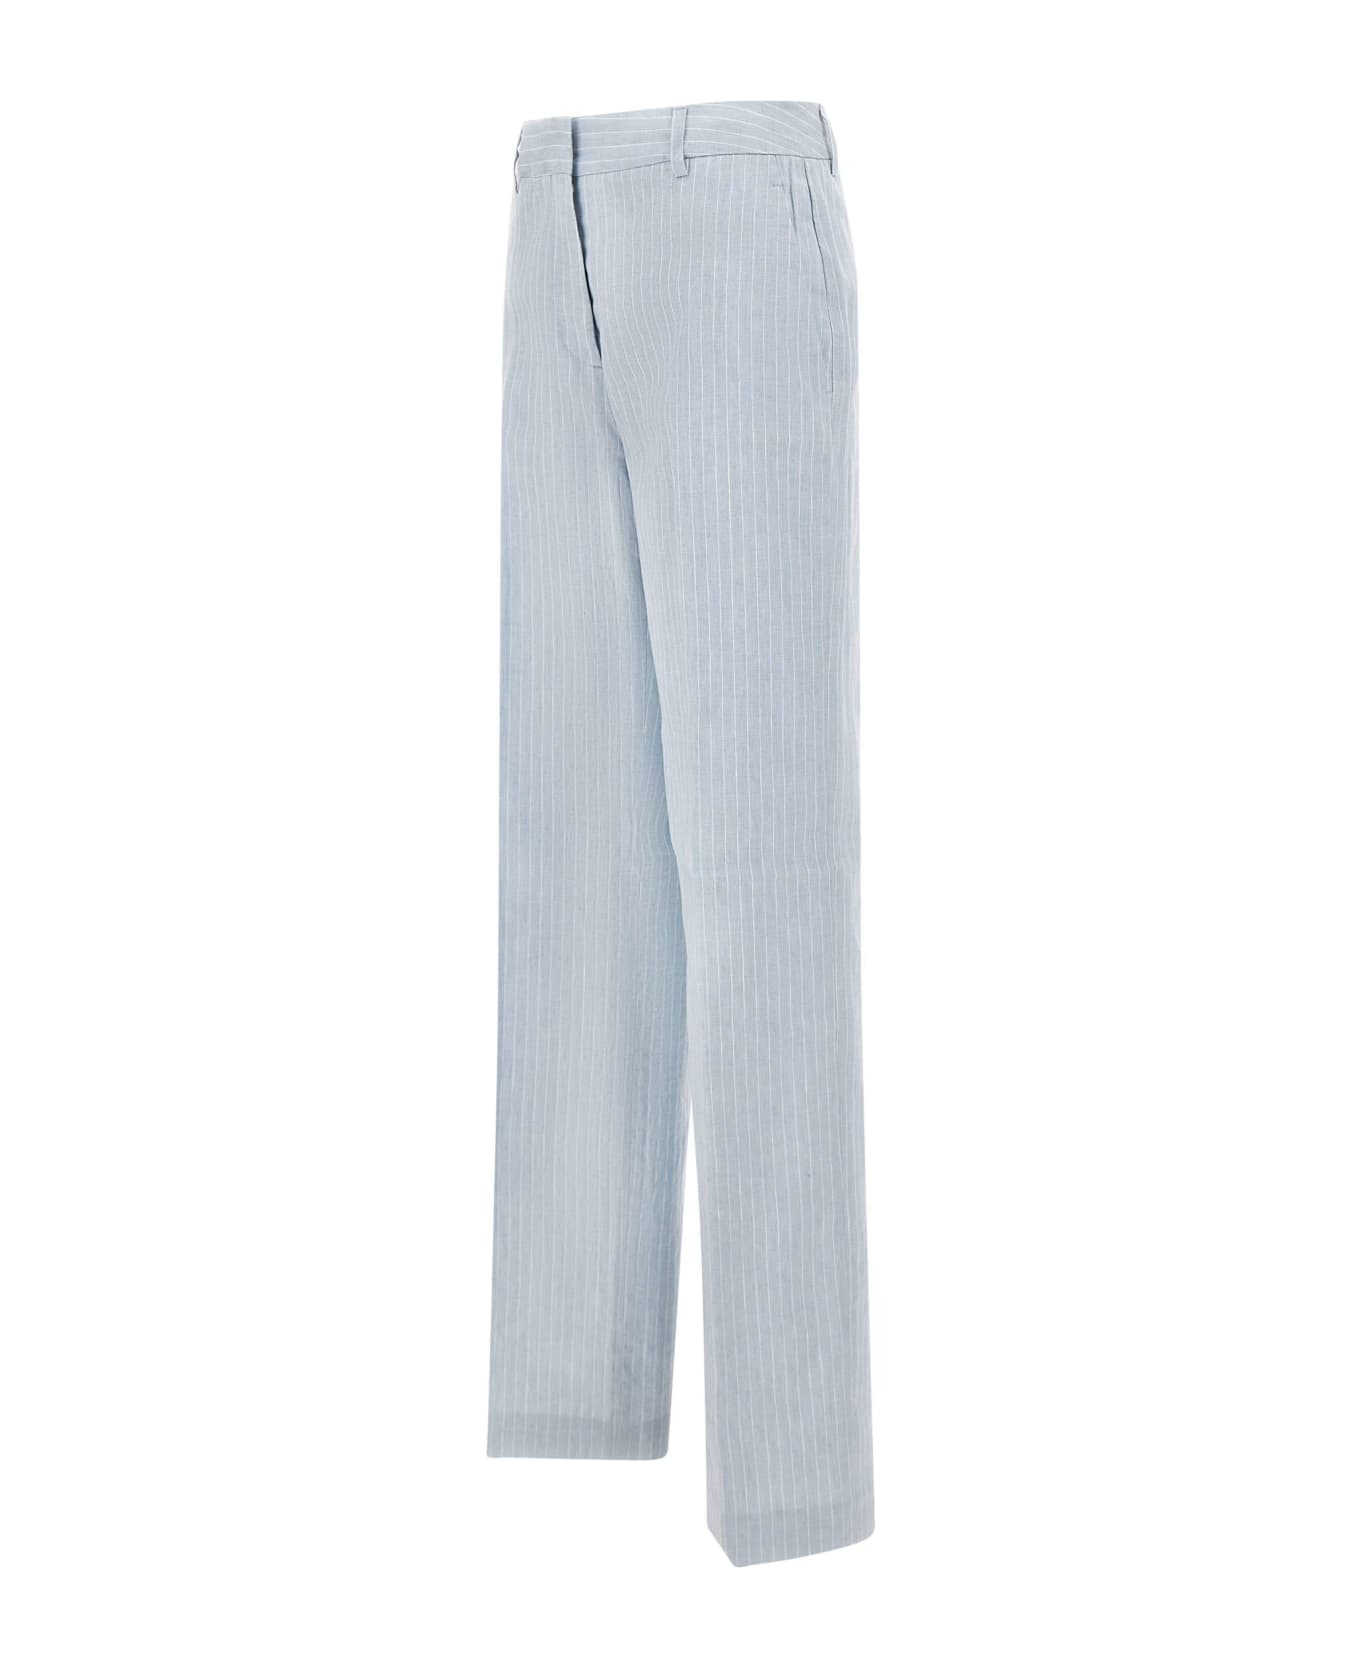 Iceberg Linen And Cotton Trousers - LIGHT BLUE